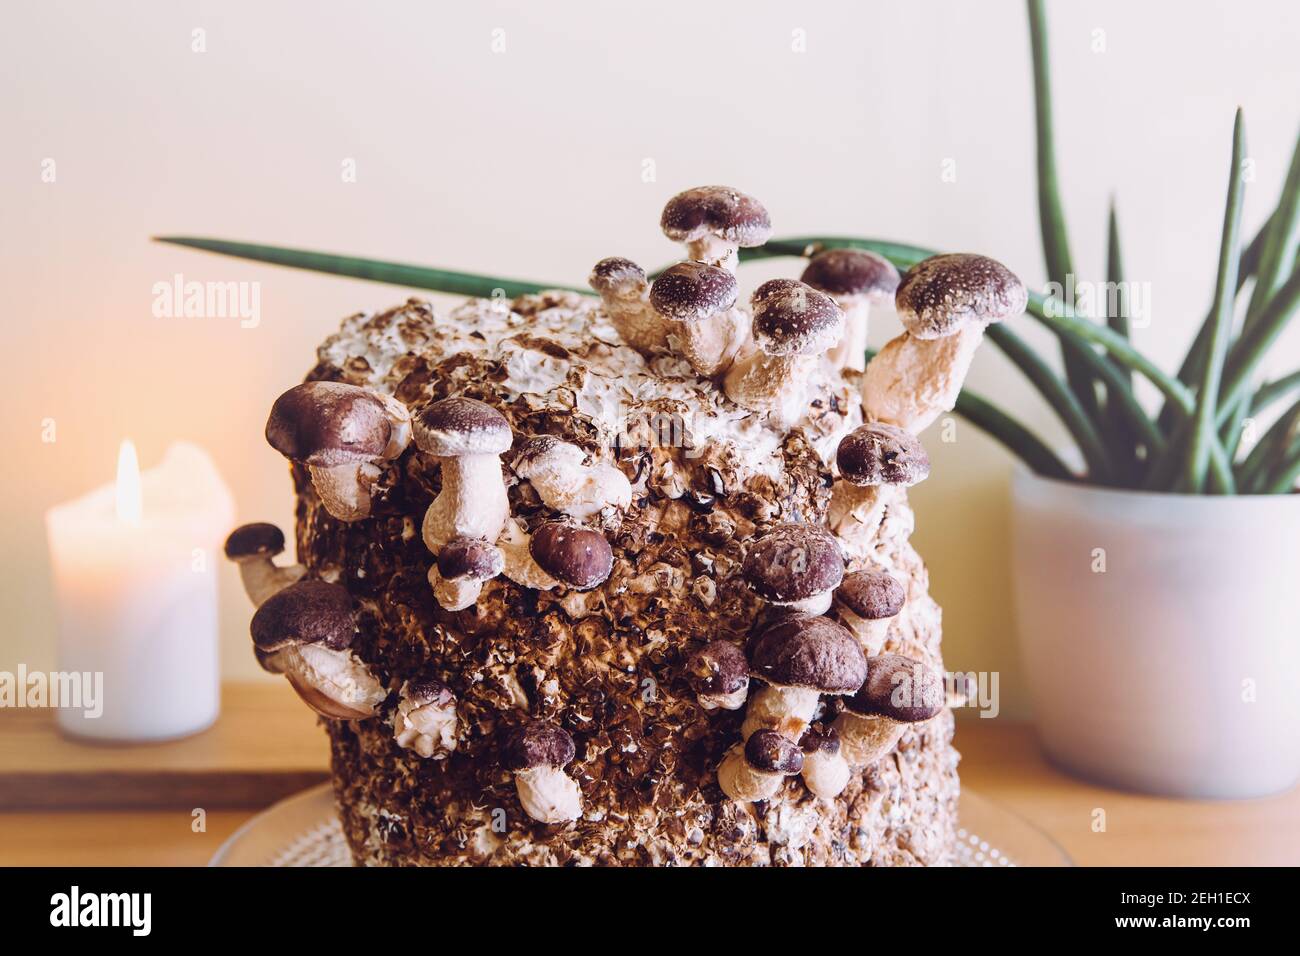 Shiitake mushrooms, Lentinula edodes growing kit in home kitchen, fungi culture. Fun hobby growing food in home. Stock Photo